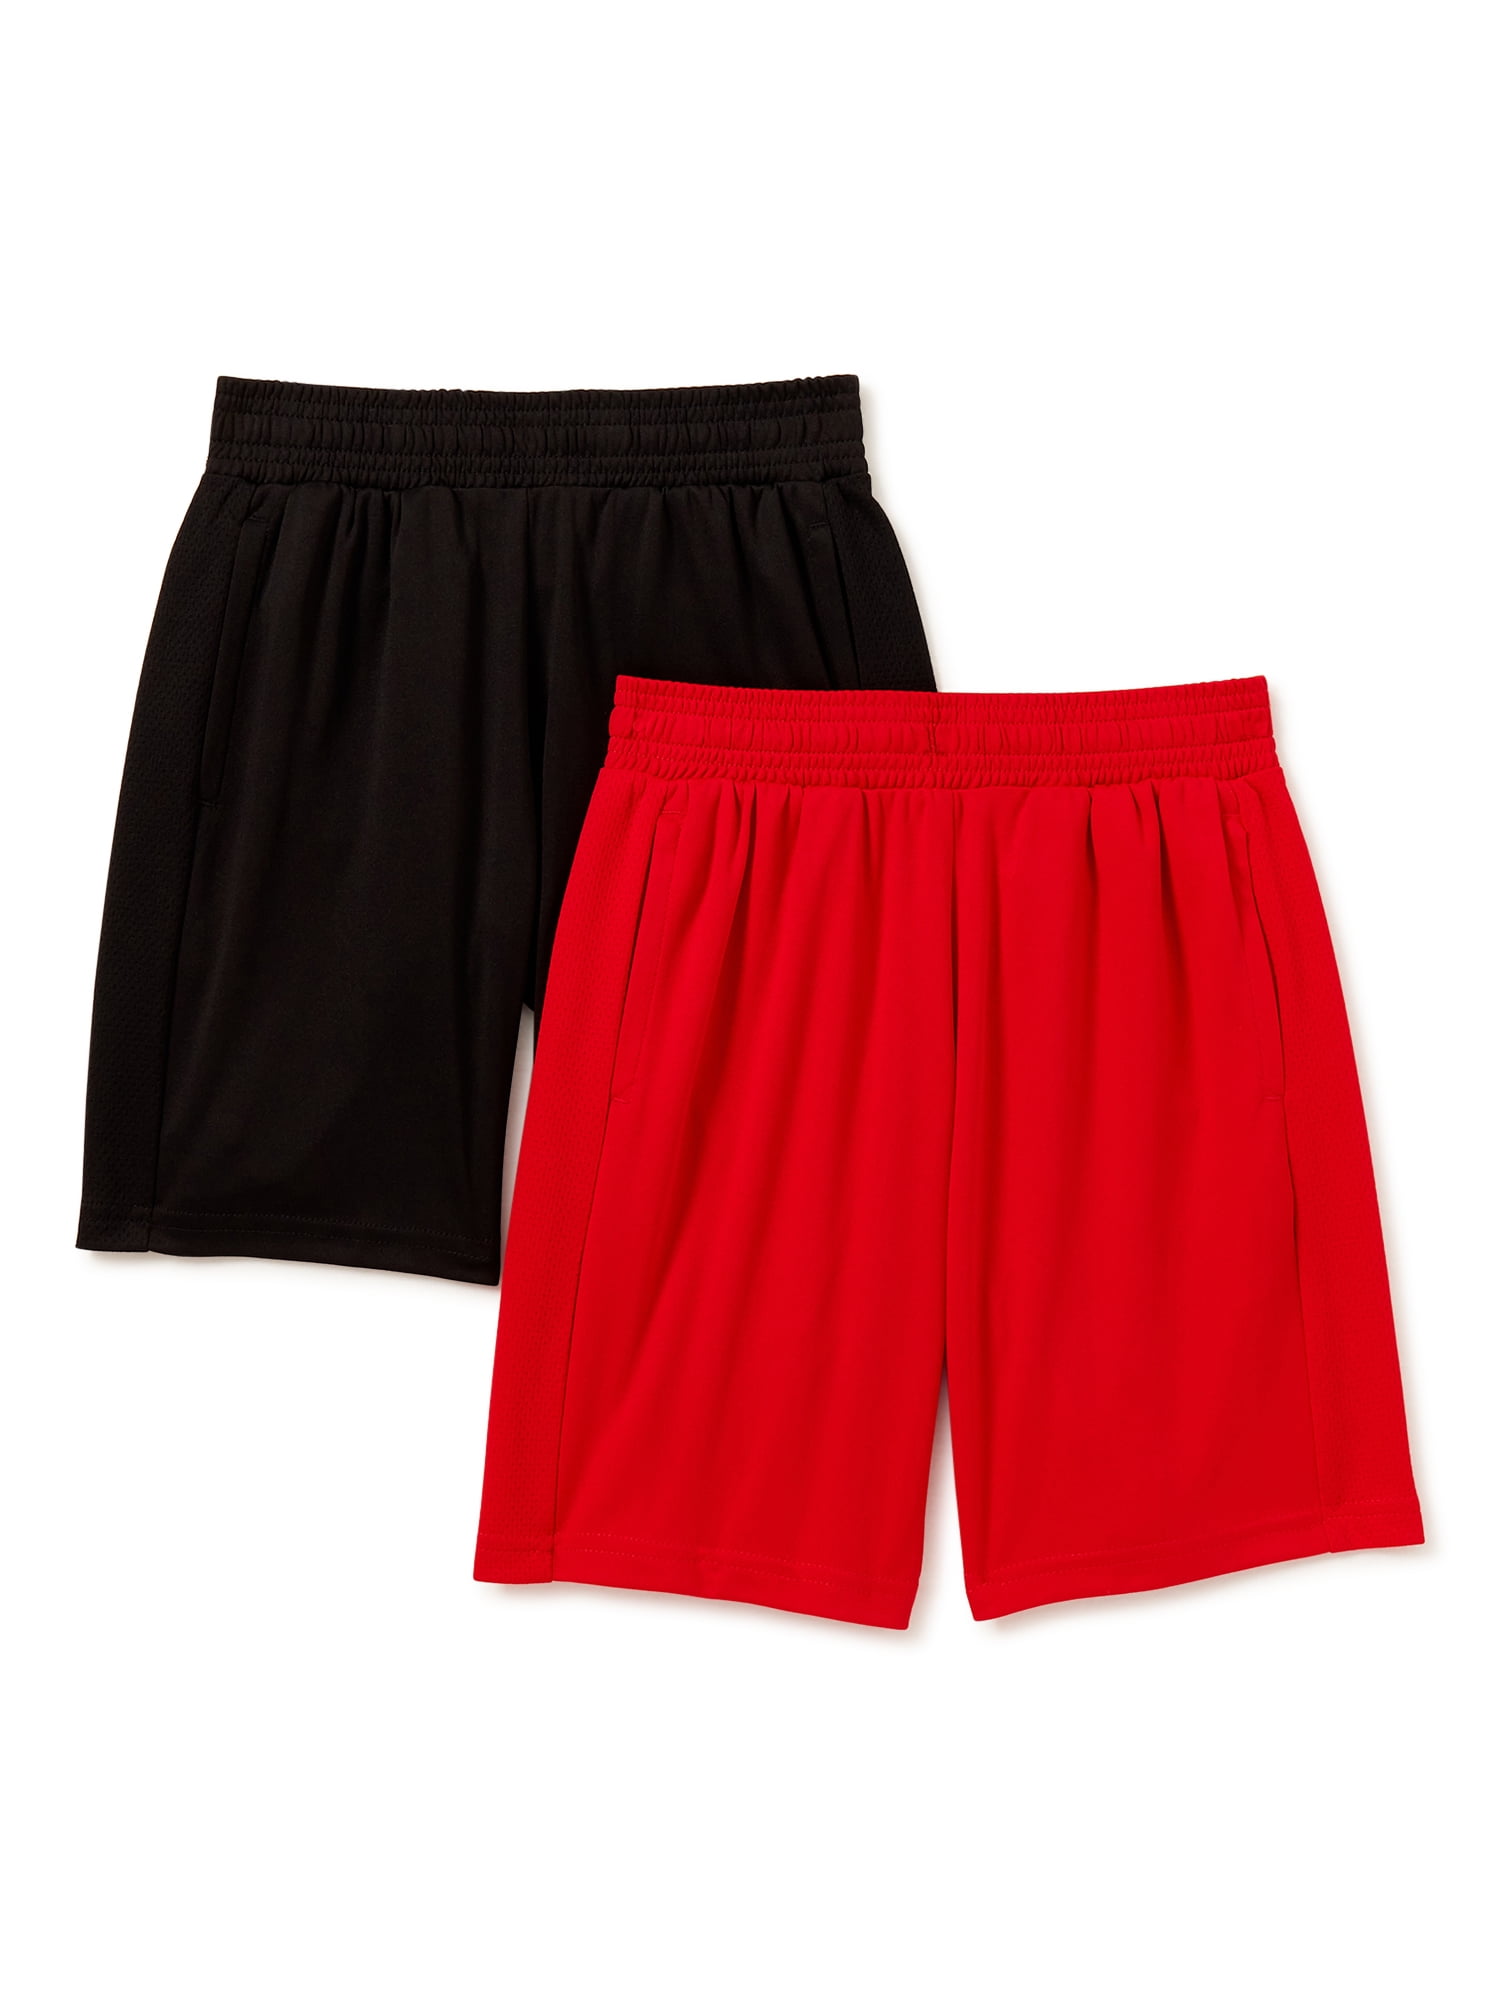 DRI-Equip Youth Moisture Wicking All Sports Shorts in 8 Colors